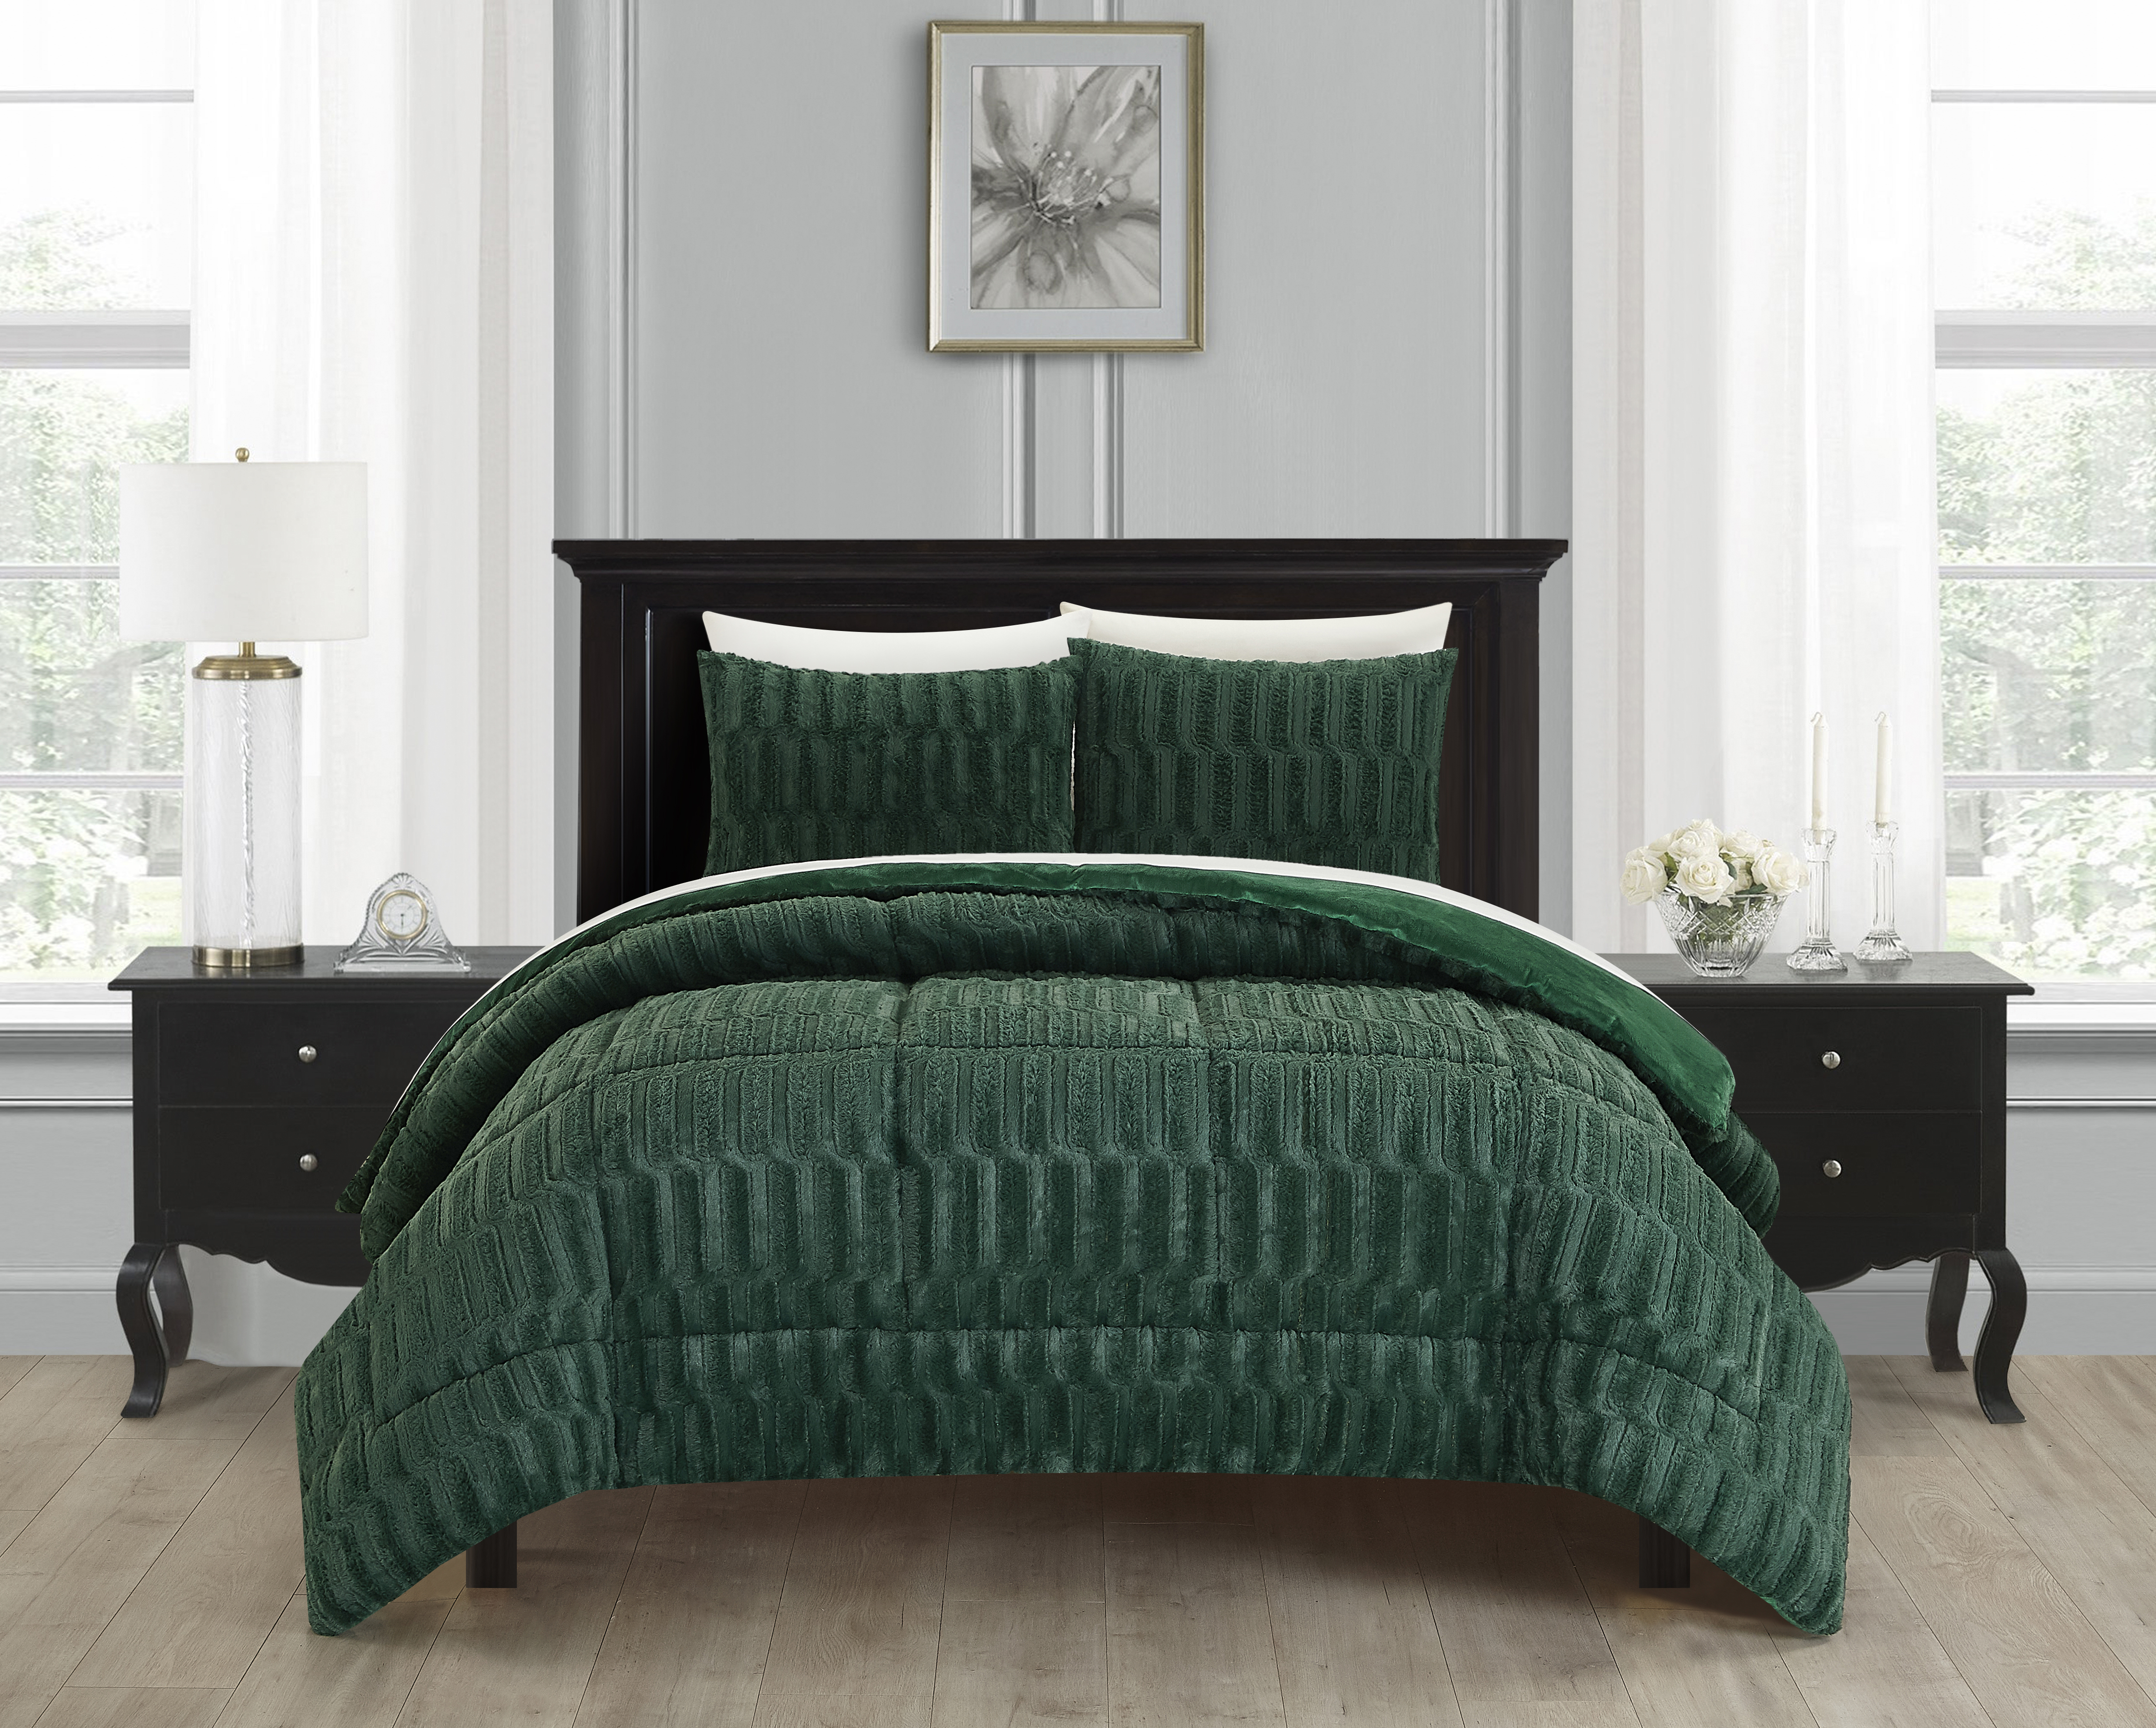 Farca 3 Or 2 Piece Comforter Textured Geometric Pattern Faux Micro-Mink Backing - Green, Twin - 2 Piece